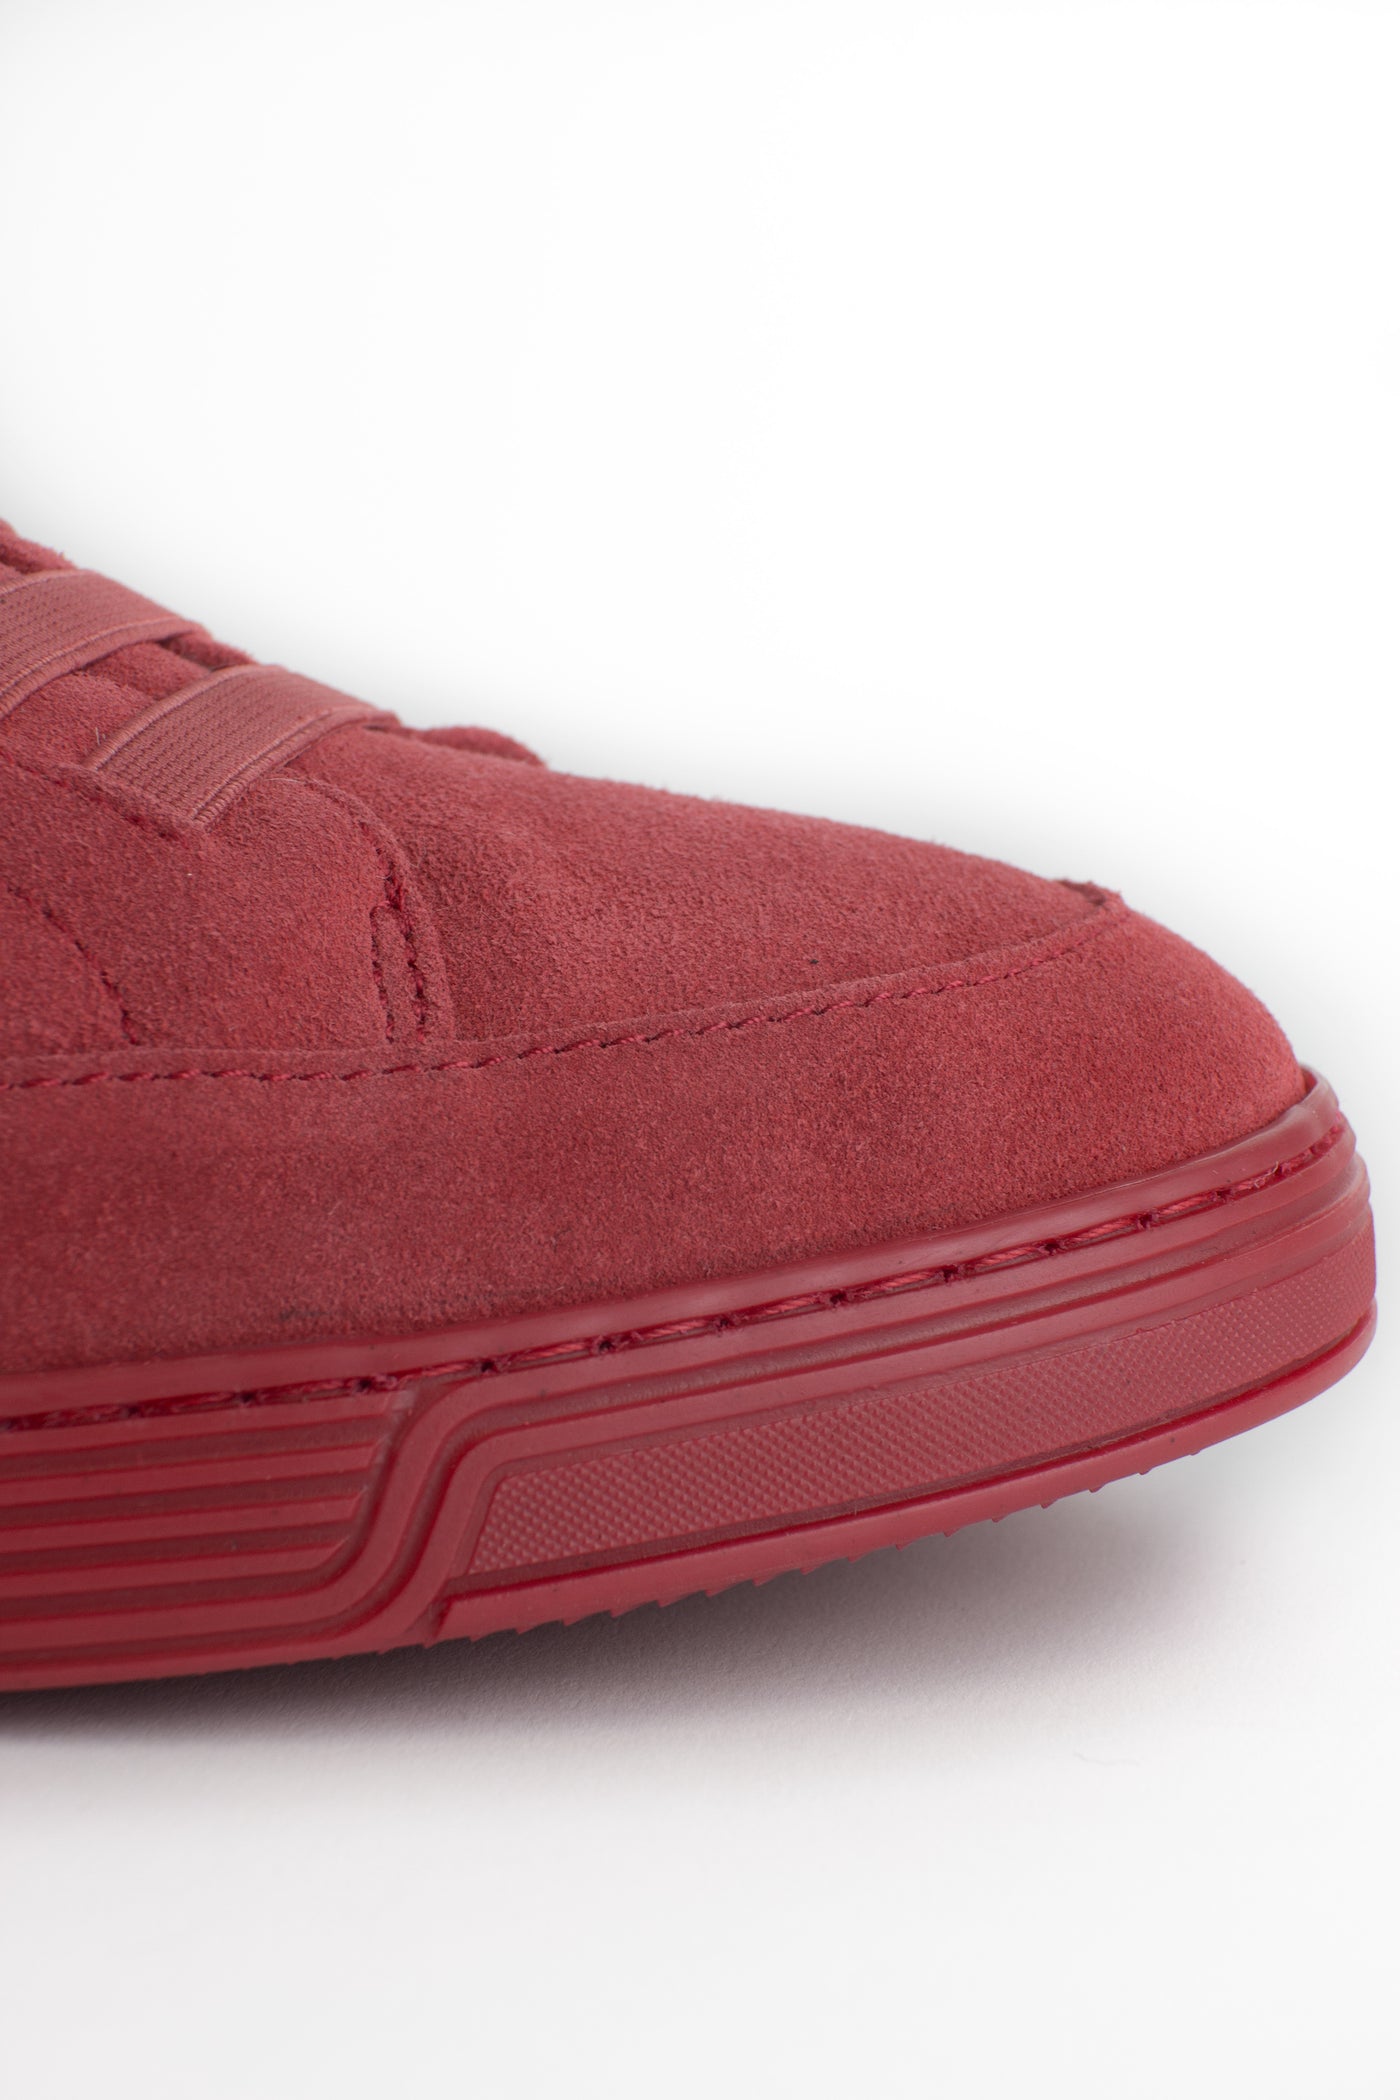 TIME Slippers-Women's Low-top Slippers, #color_suede-candy-red